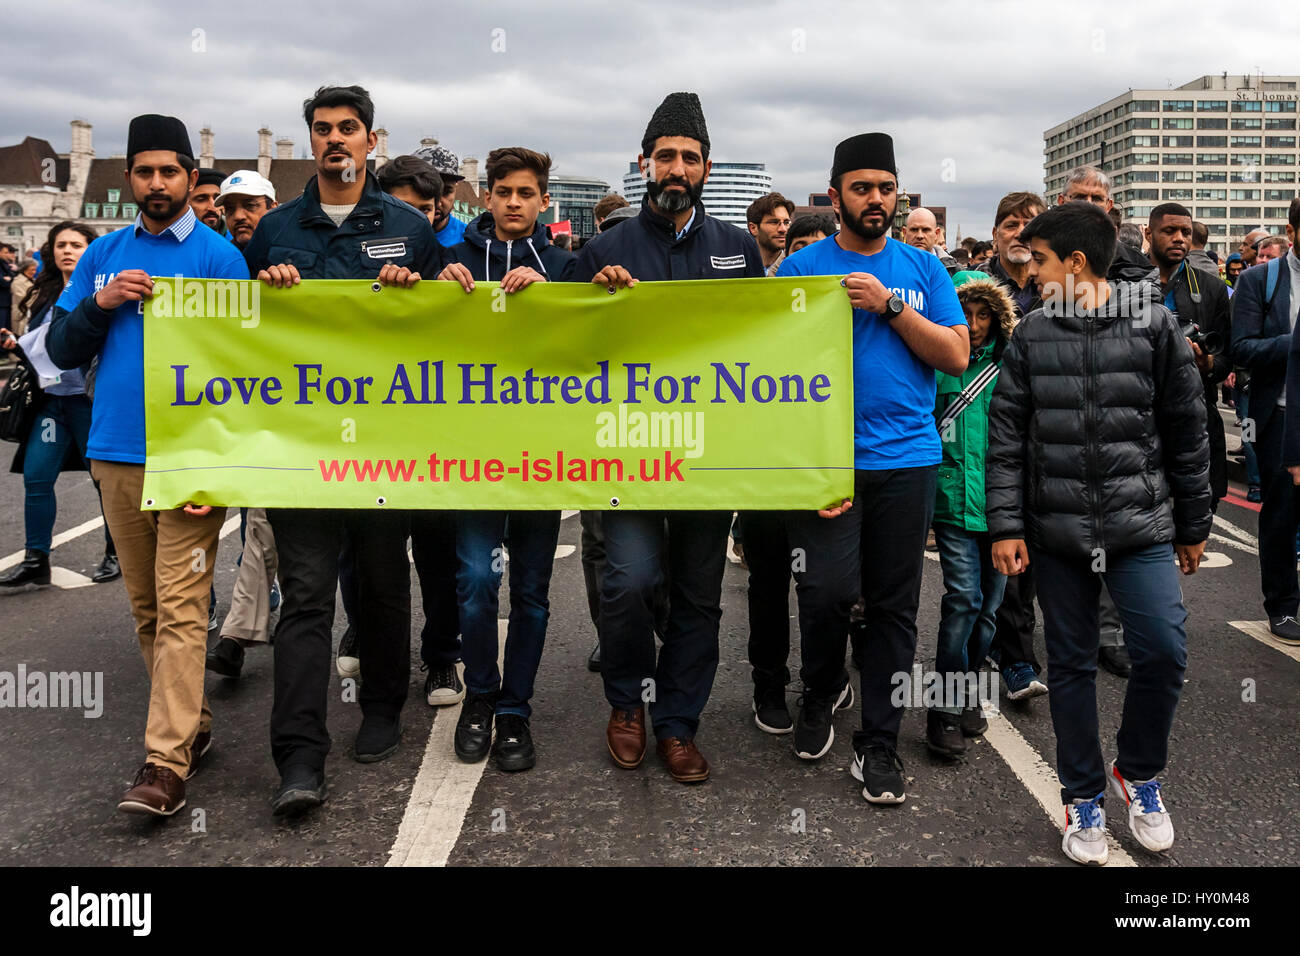 A Week After The London Terror Attack, Members Of The Muslim Community Walk Across Westminster Bridge With Banners Denouncing The Attack, London, UK Stock Photo